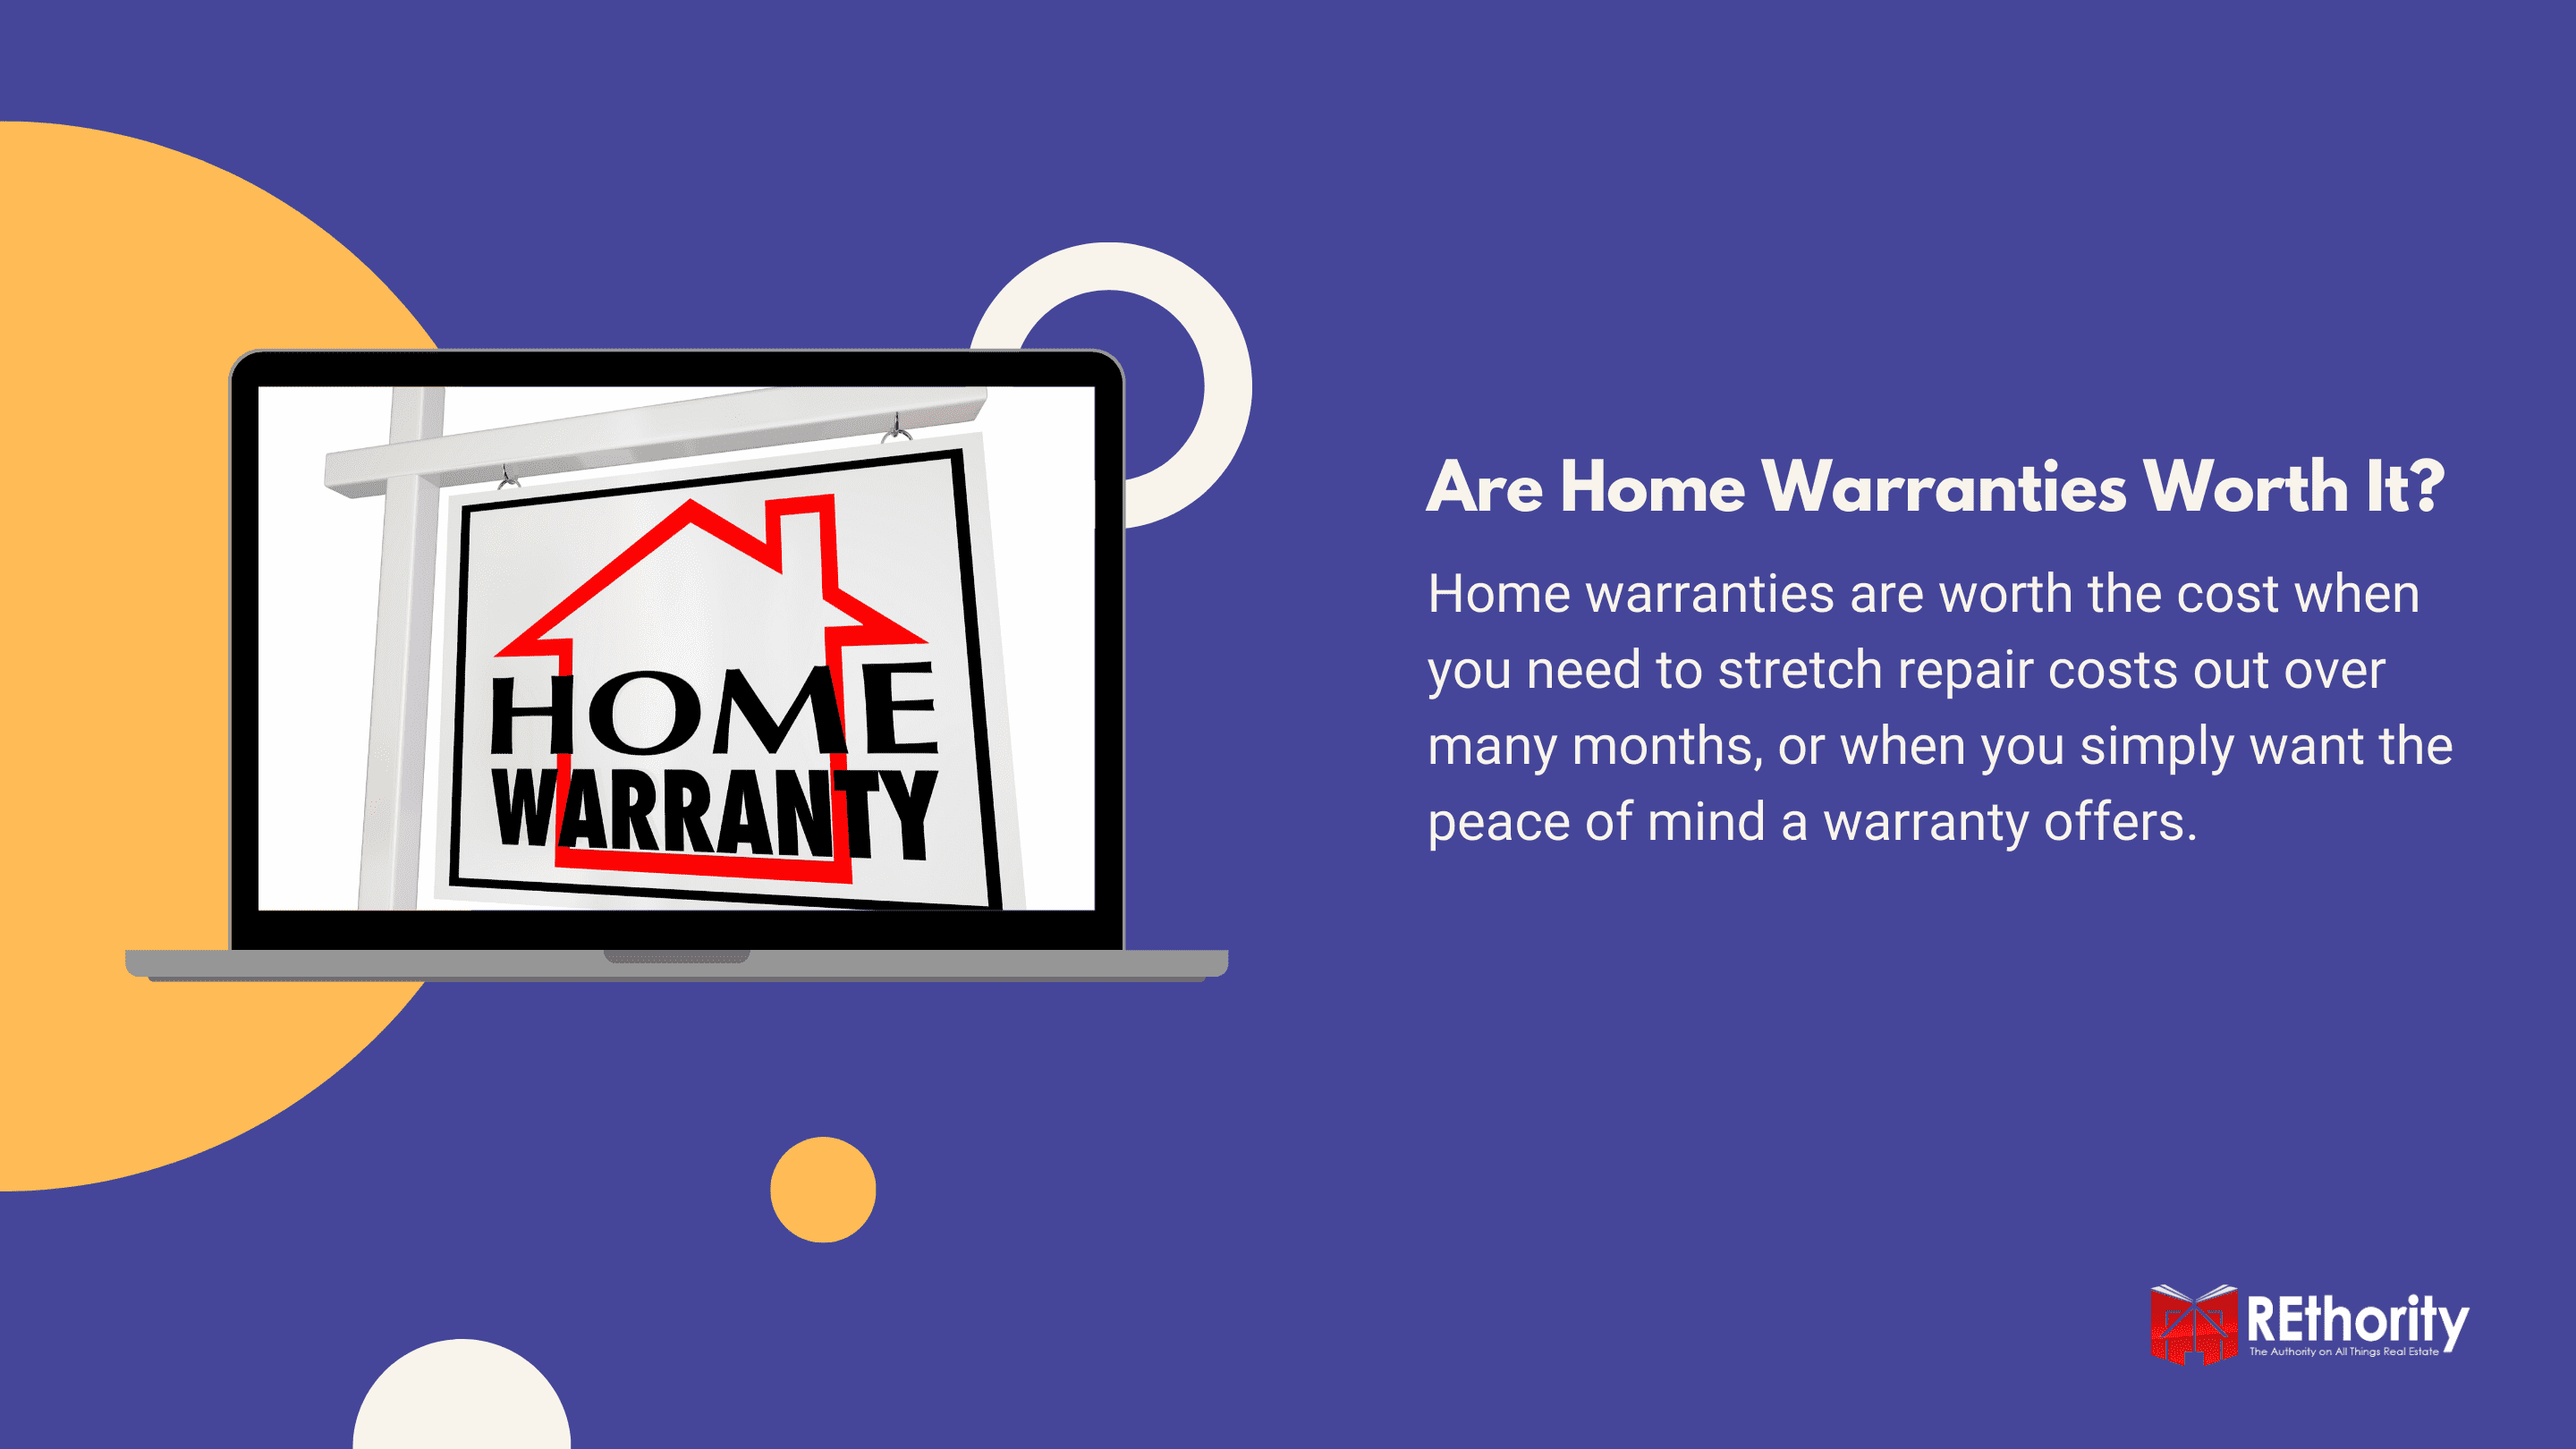 Are Home Warranties Worth It graphic against blue background featuring a laptop and with a home warranty graphic displayed on the screen